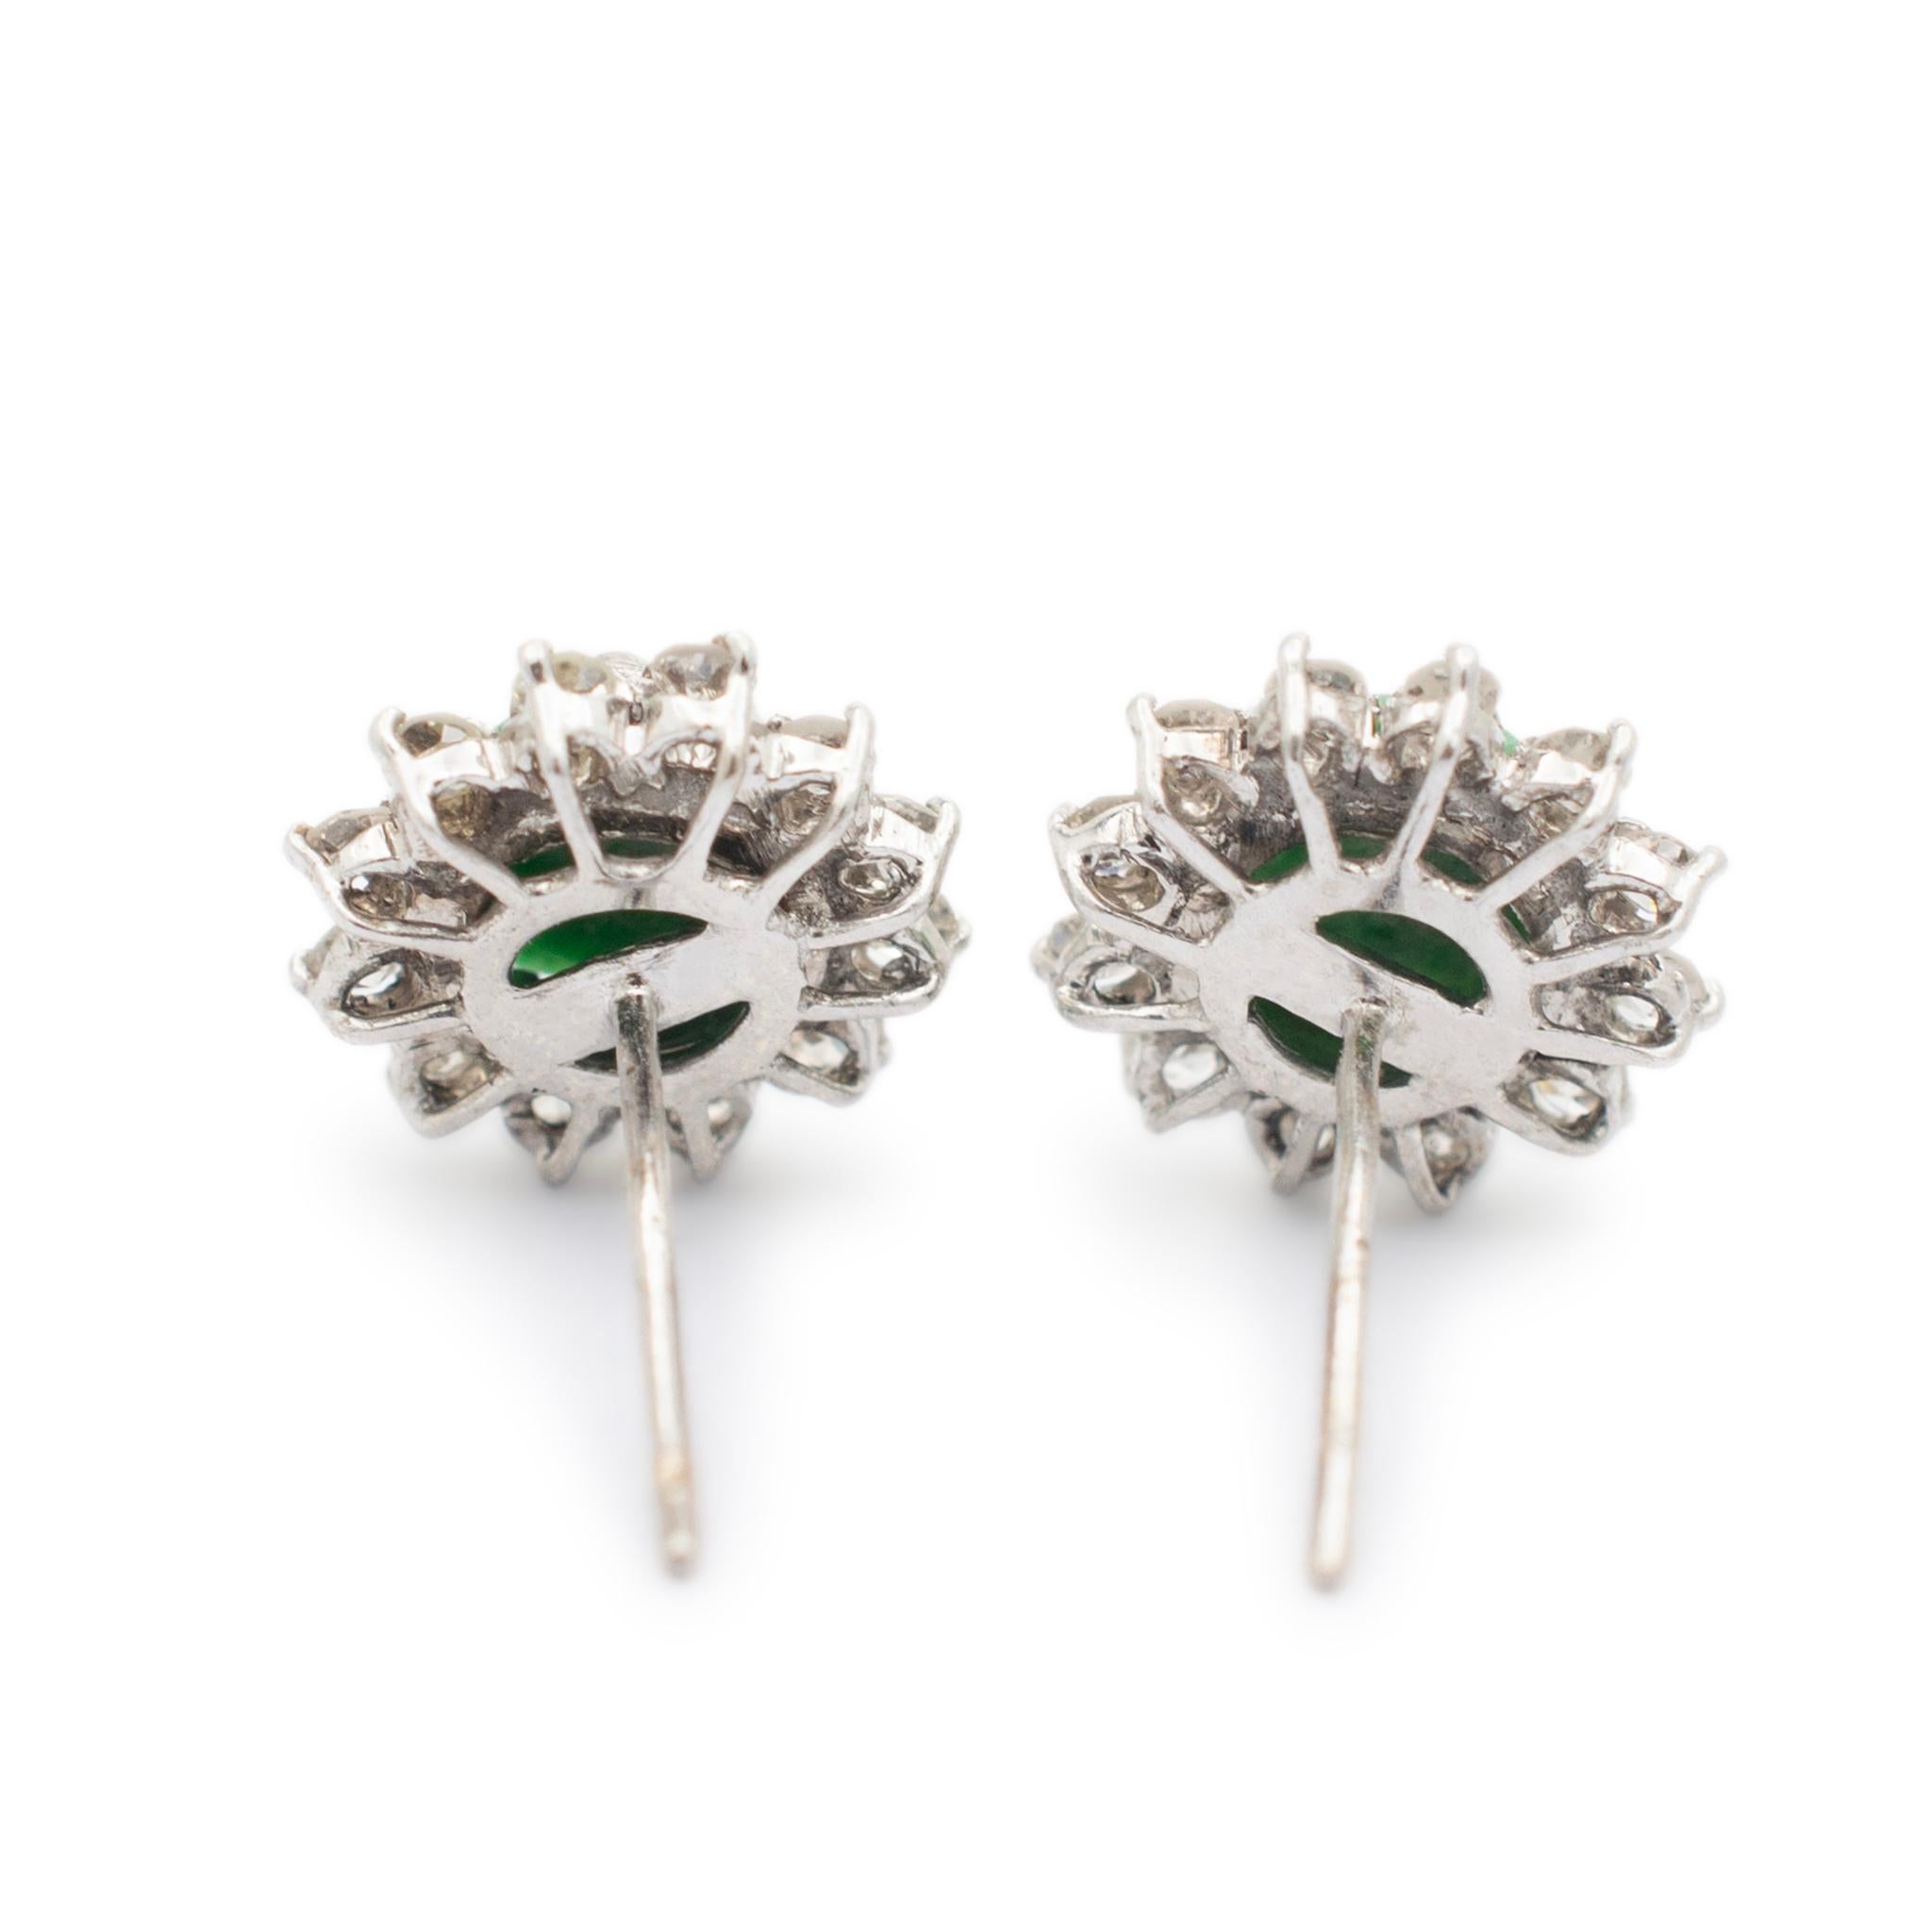 Ladies 14K White Gold Jade Halo Diamond Stud Earrings In Excellent Condition For Sale In Houston, TX